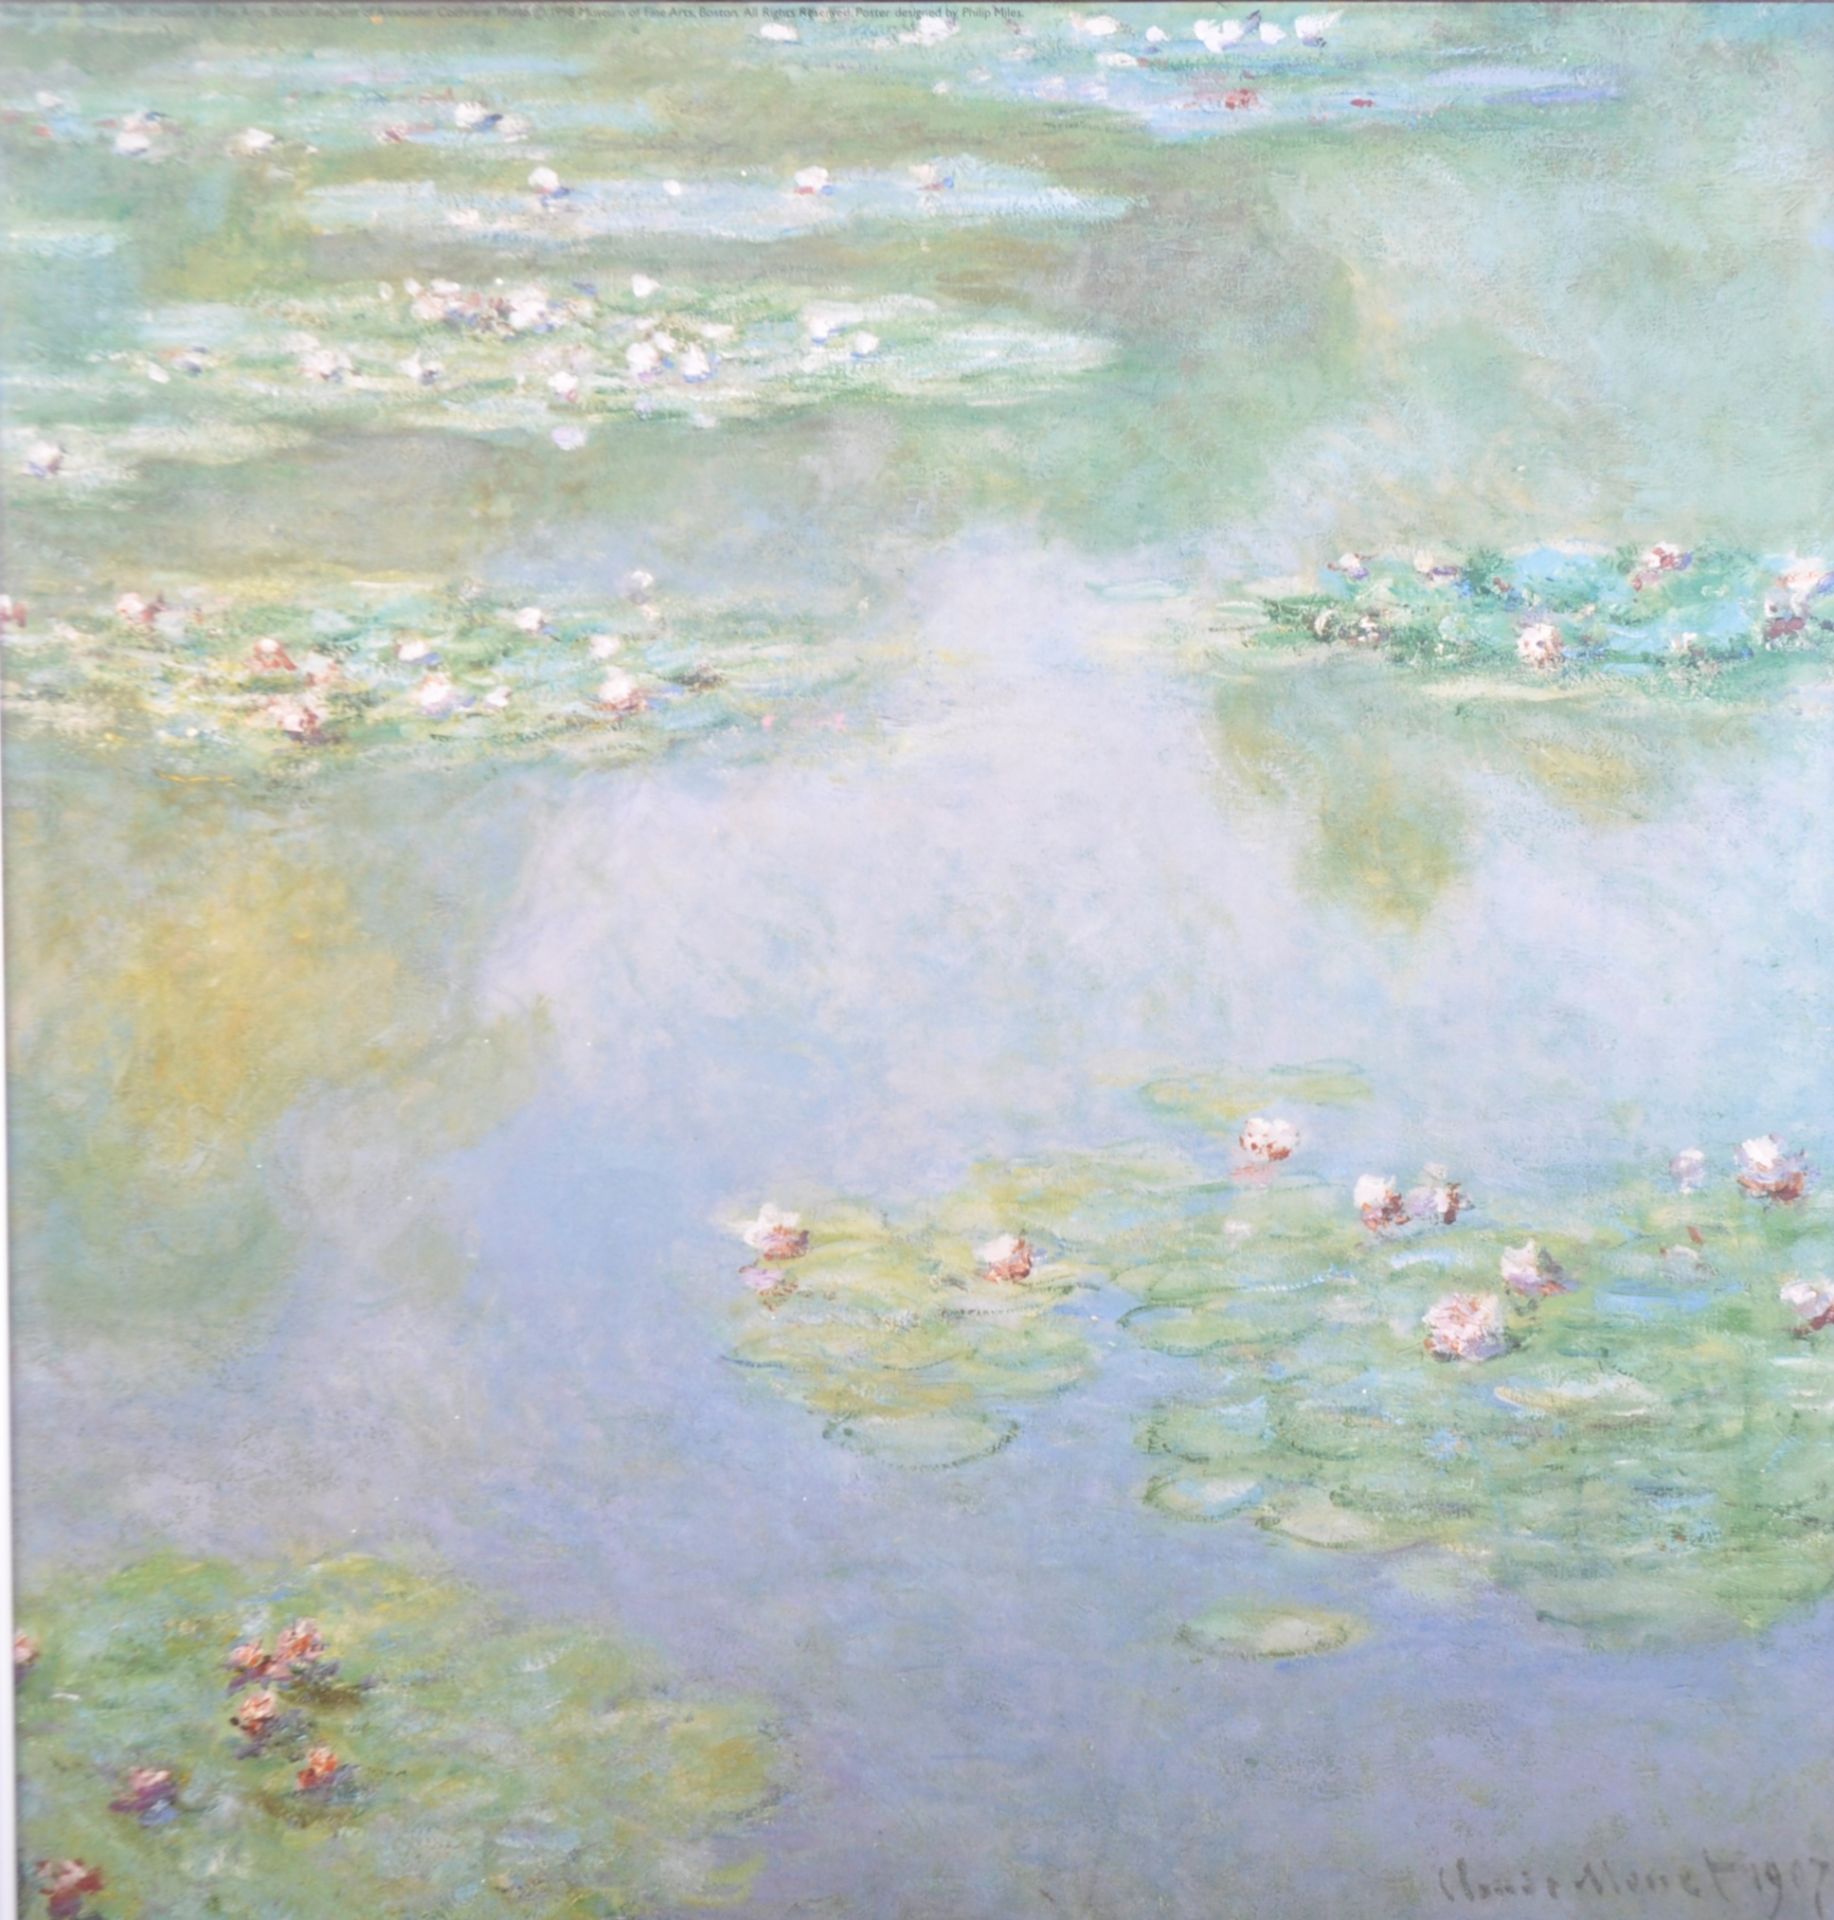 MONET - ROYAL ACADEMY OF ARTS - ORIGINAL EXHIBITION POSTER - Image 5 of 7